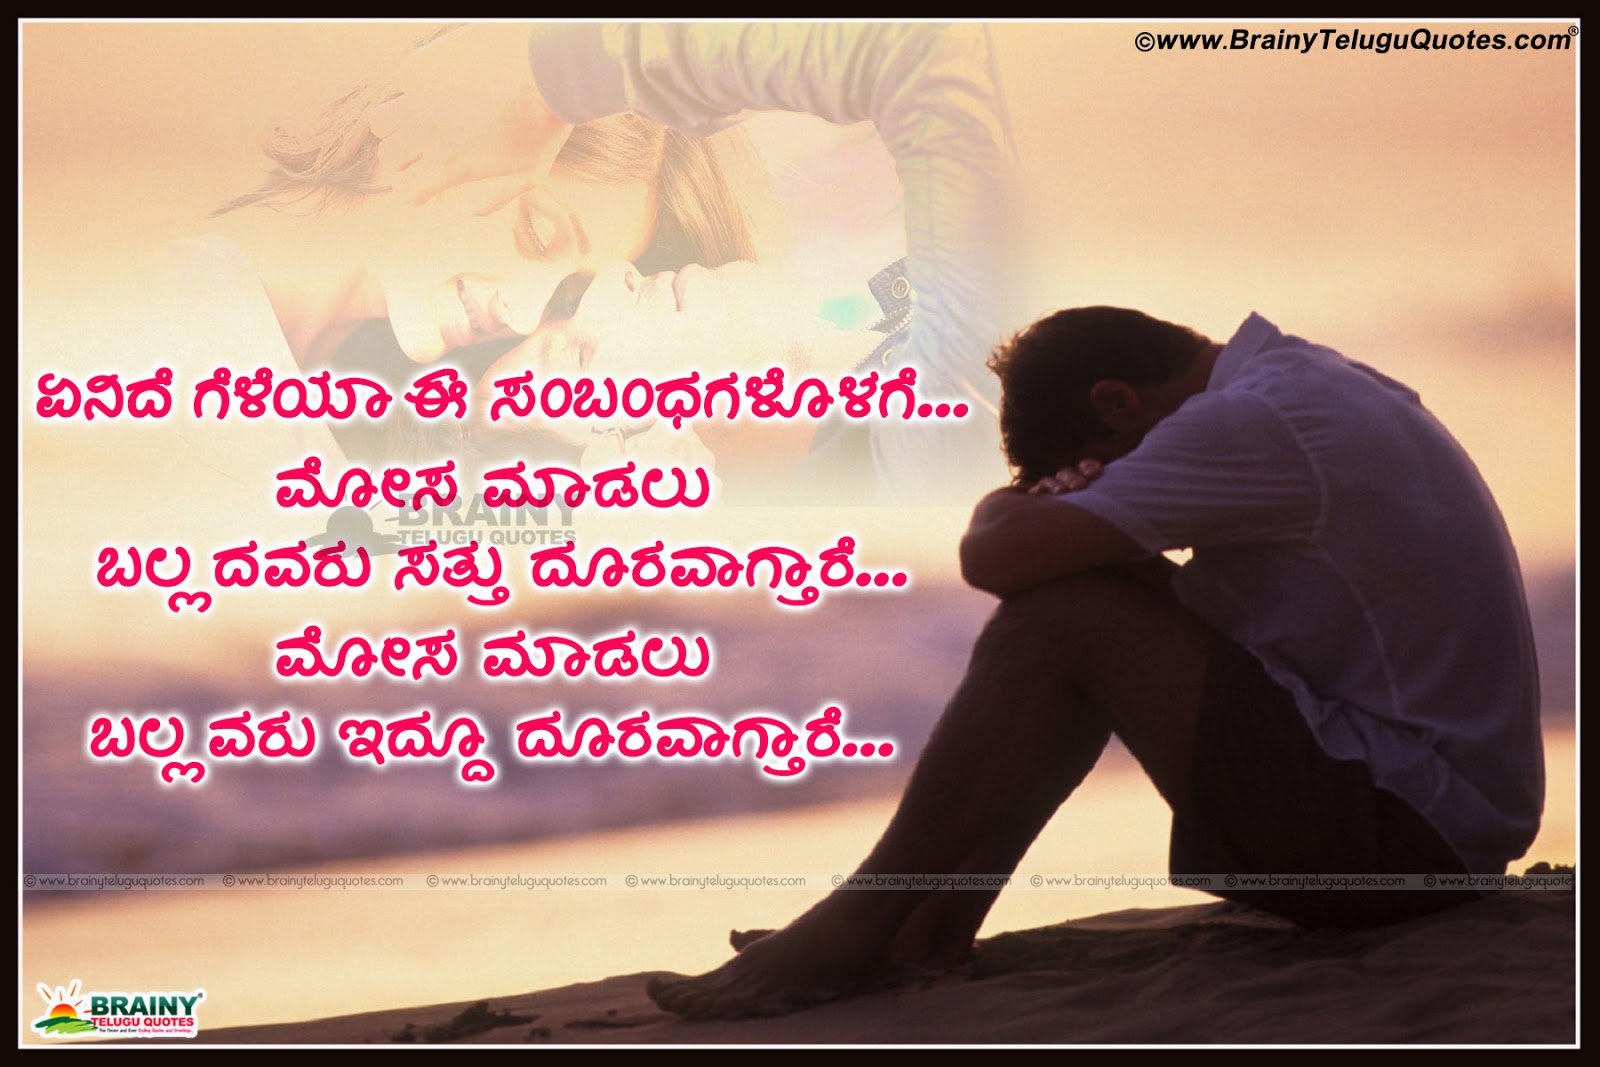 Sad Love Failure Quotes In Kannada Kannada love failure quotes and miss you images